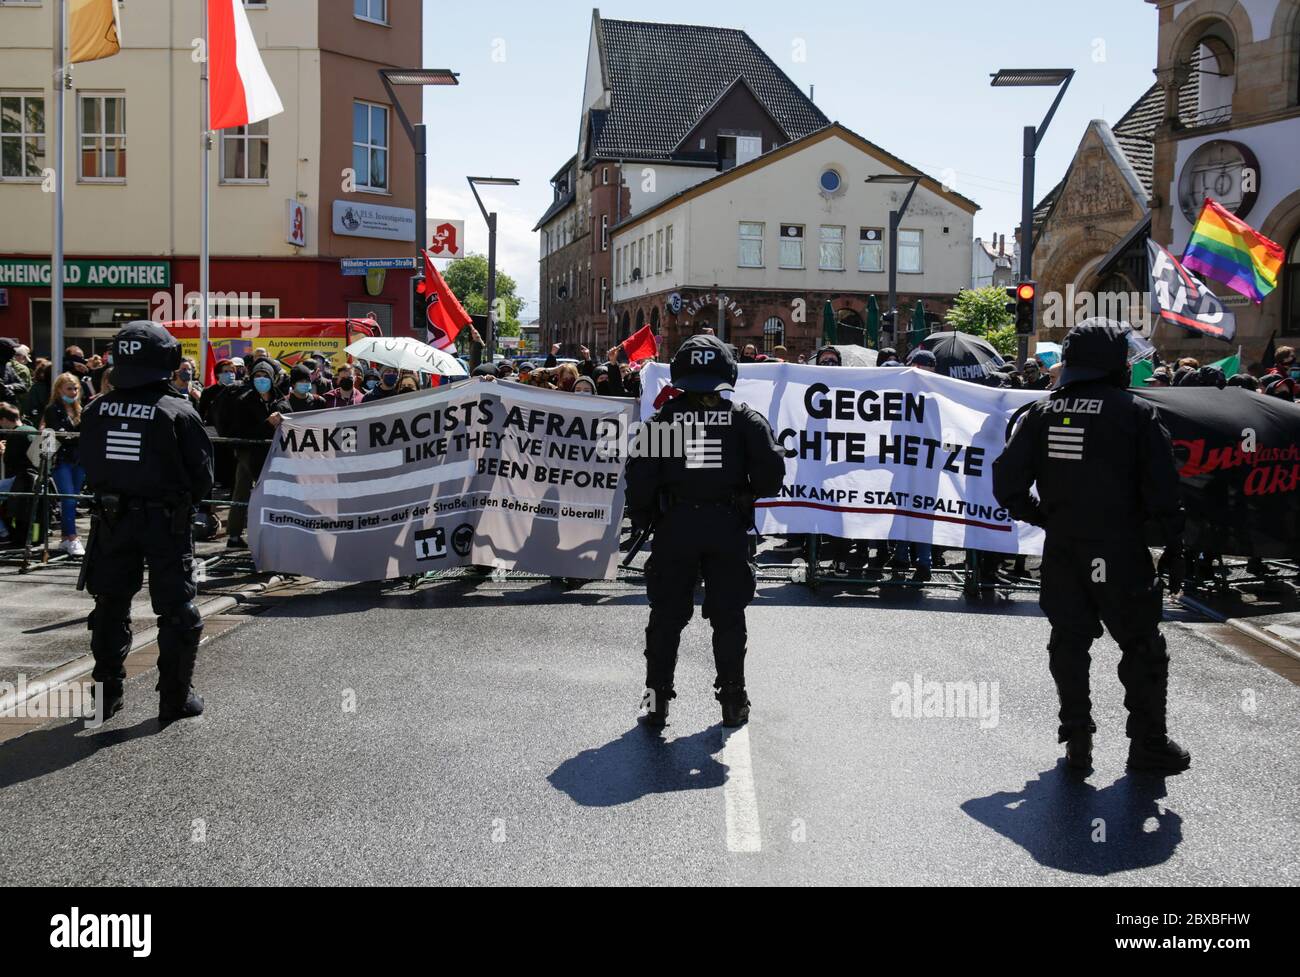 Worms, Germany. 6th June 2020. Police officers watch the counter protest in full riot gear. Around 50 right-wing protesters marched through the city centre of Worms for the 12. and last 'Day of the German Future’. The march was cut short due to several hundred counter protesters who blocked the  path of the right-wing march. The march was a yearly right-wing event in different German city that drew over 1000 protesters at its high-point. Stock Photo